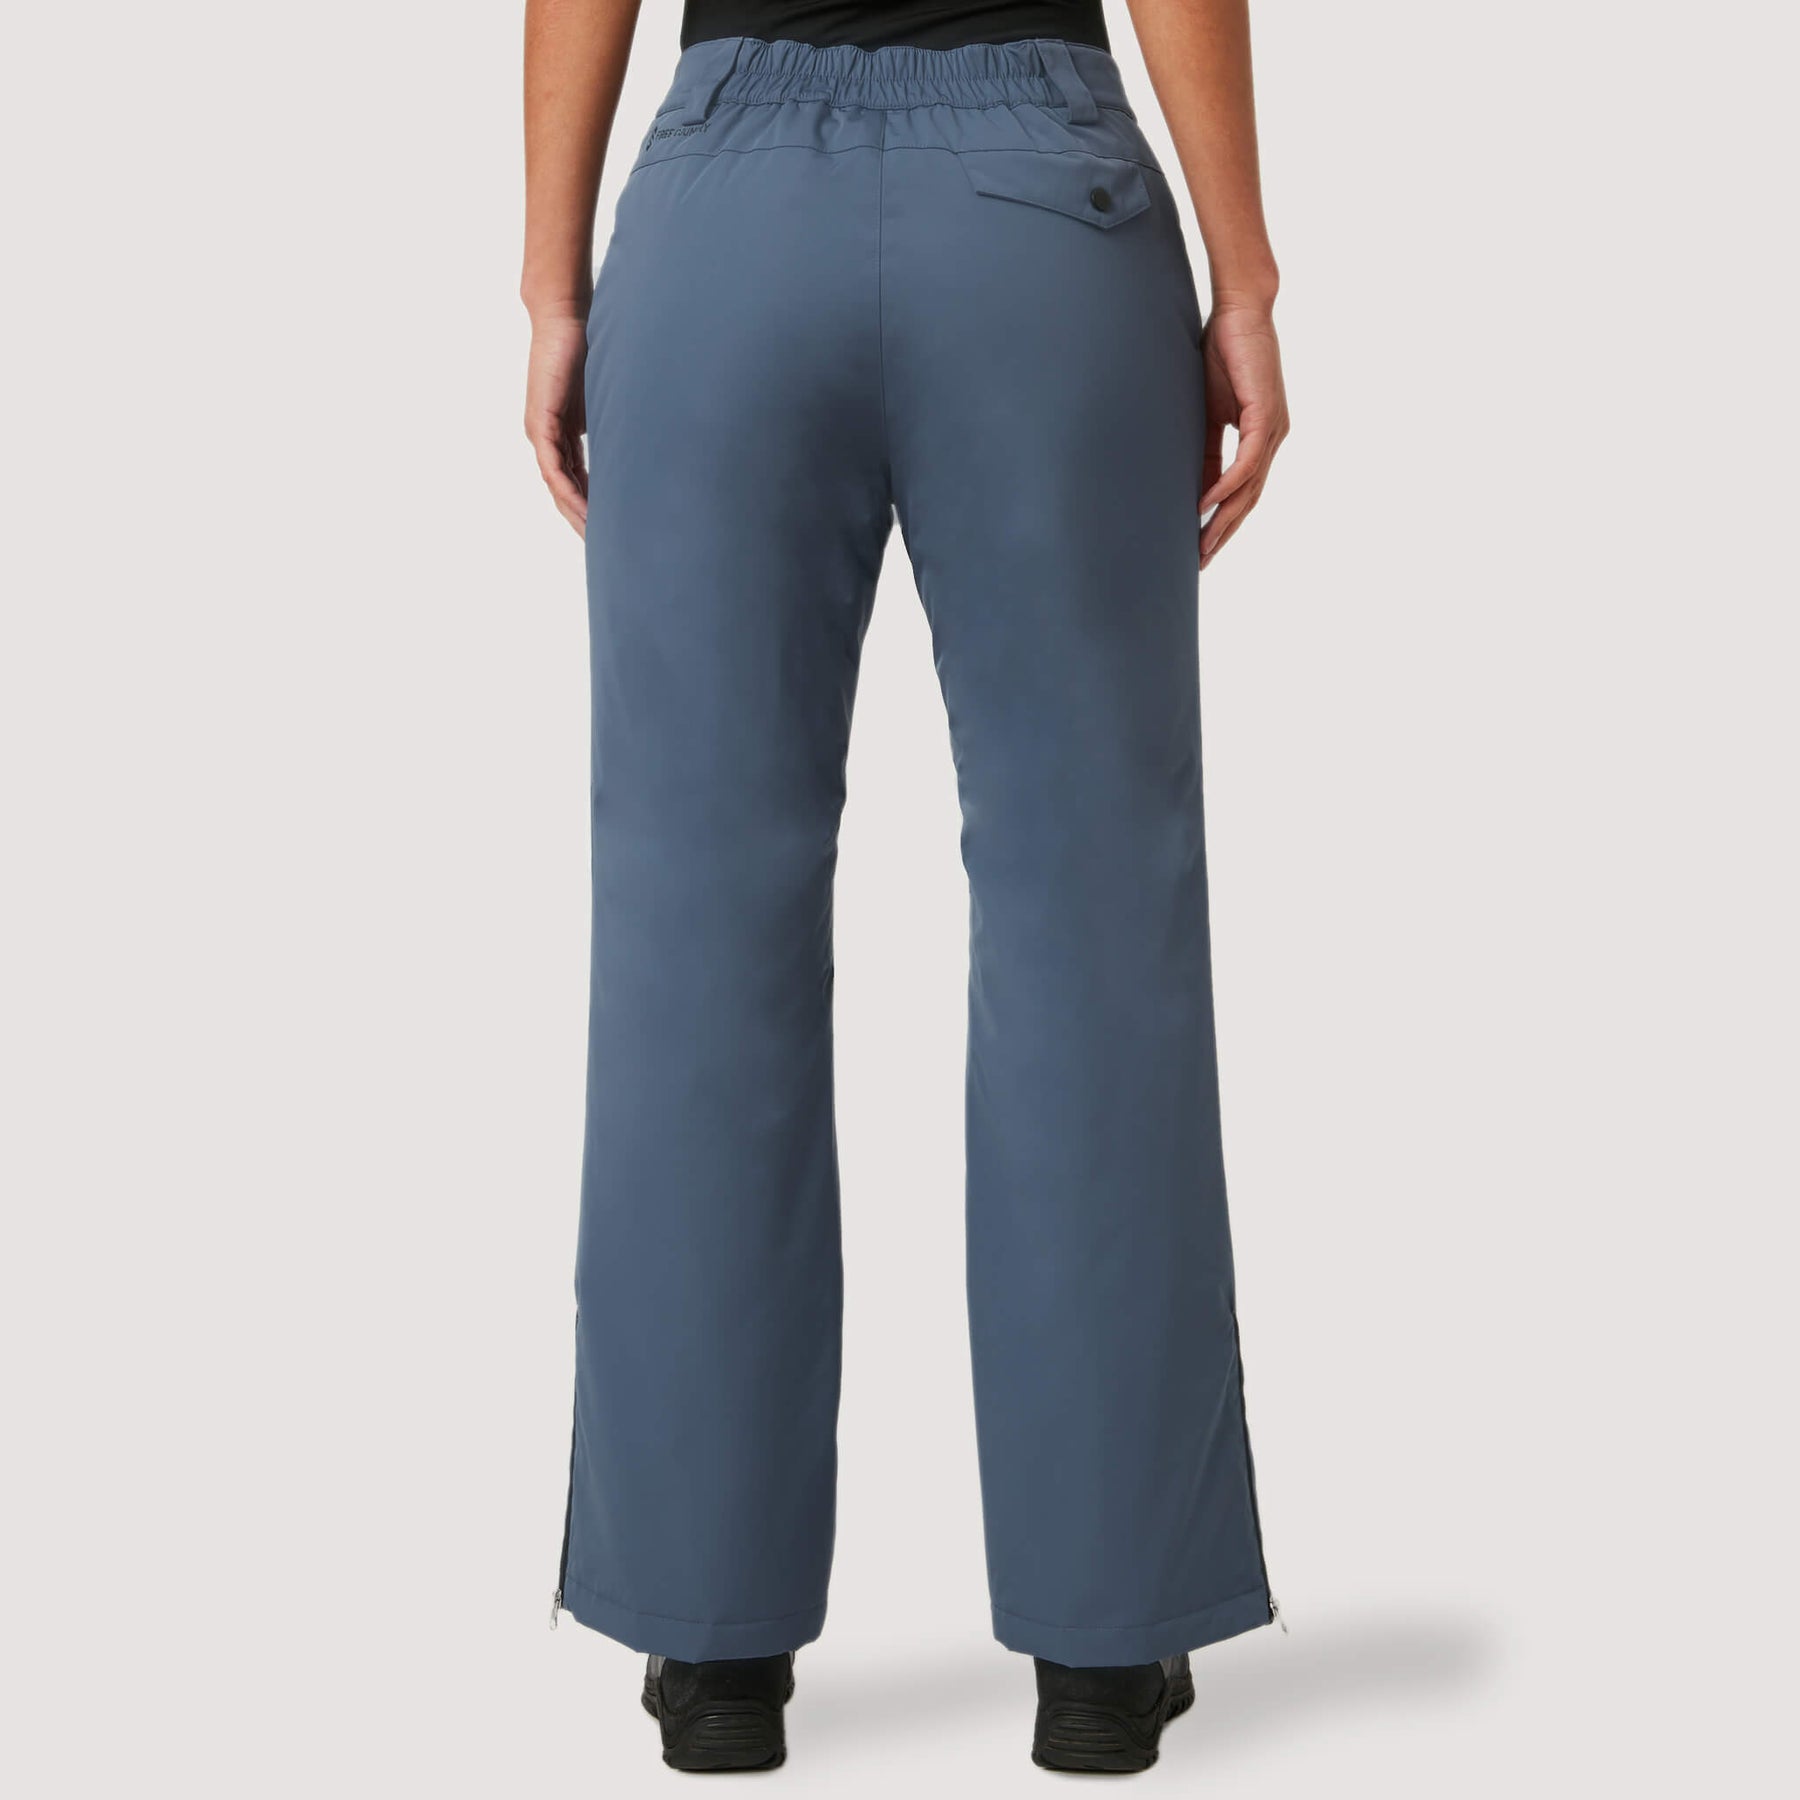 Skinny Ski Pants for Women - Up to 80% off